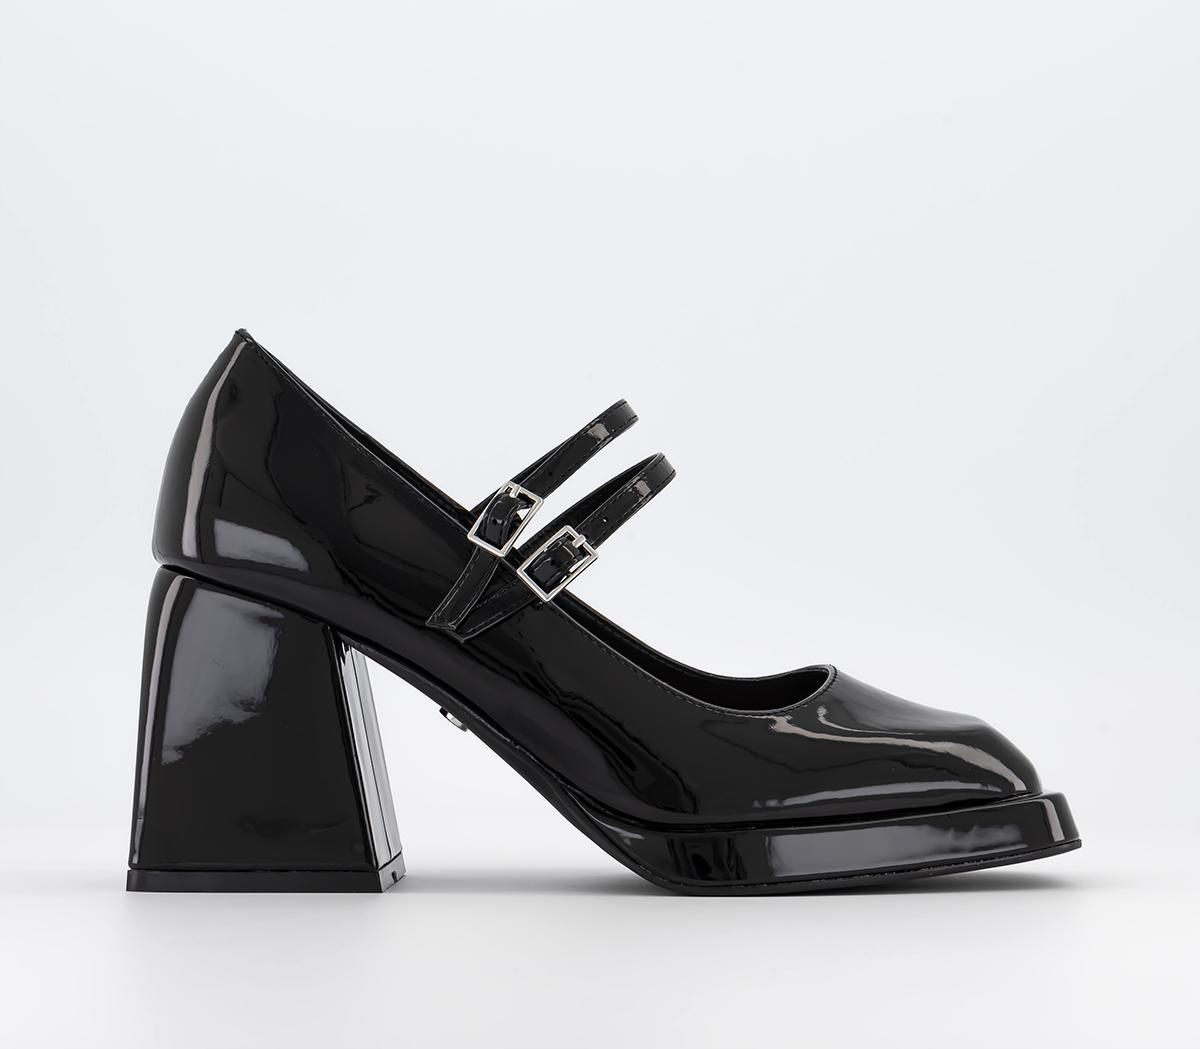 OFFICE Max Out Mary Jane Platform Courts Black Patent - Mid Heels